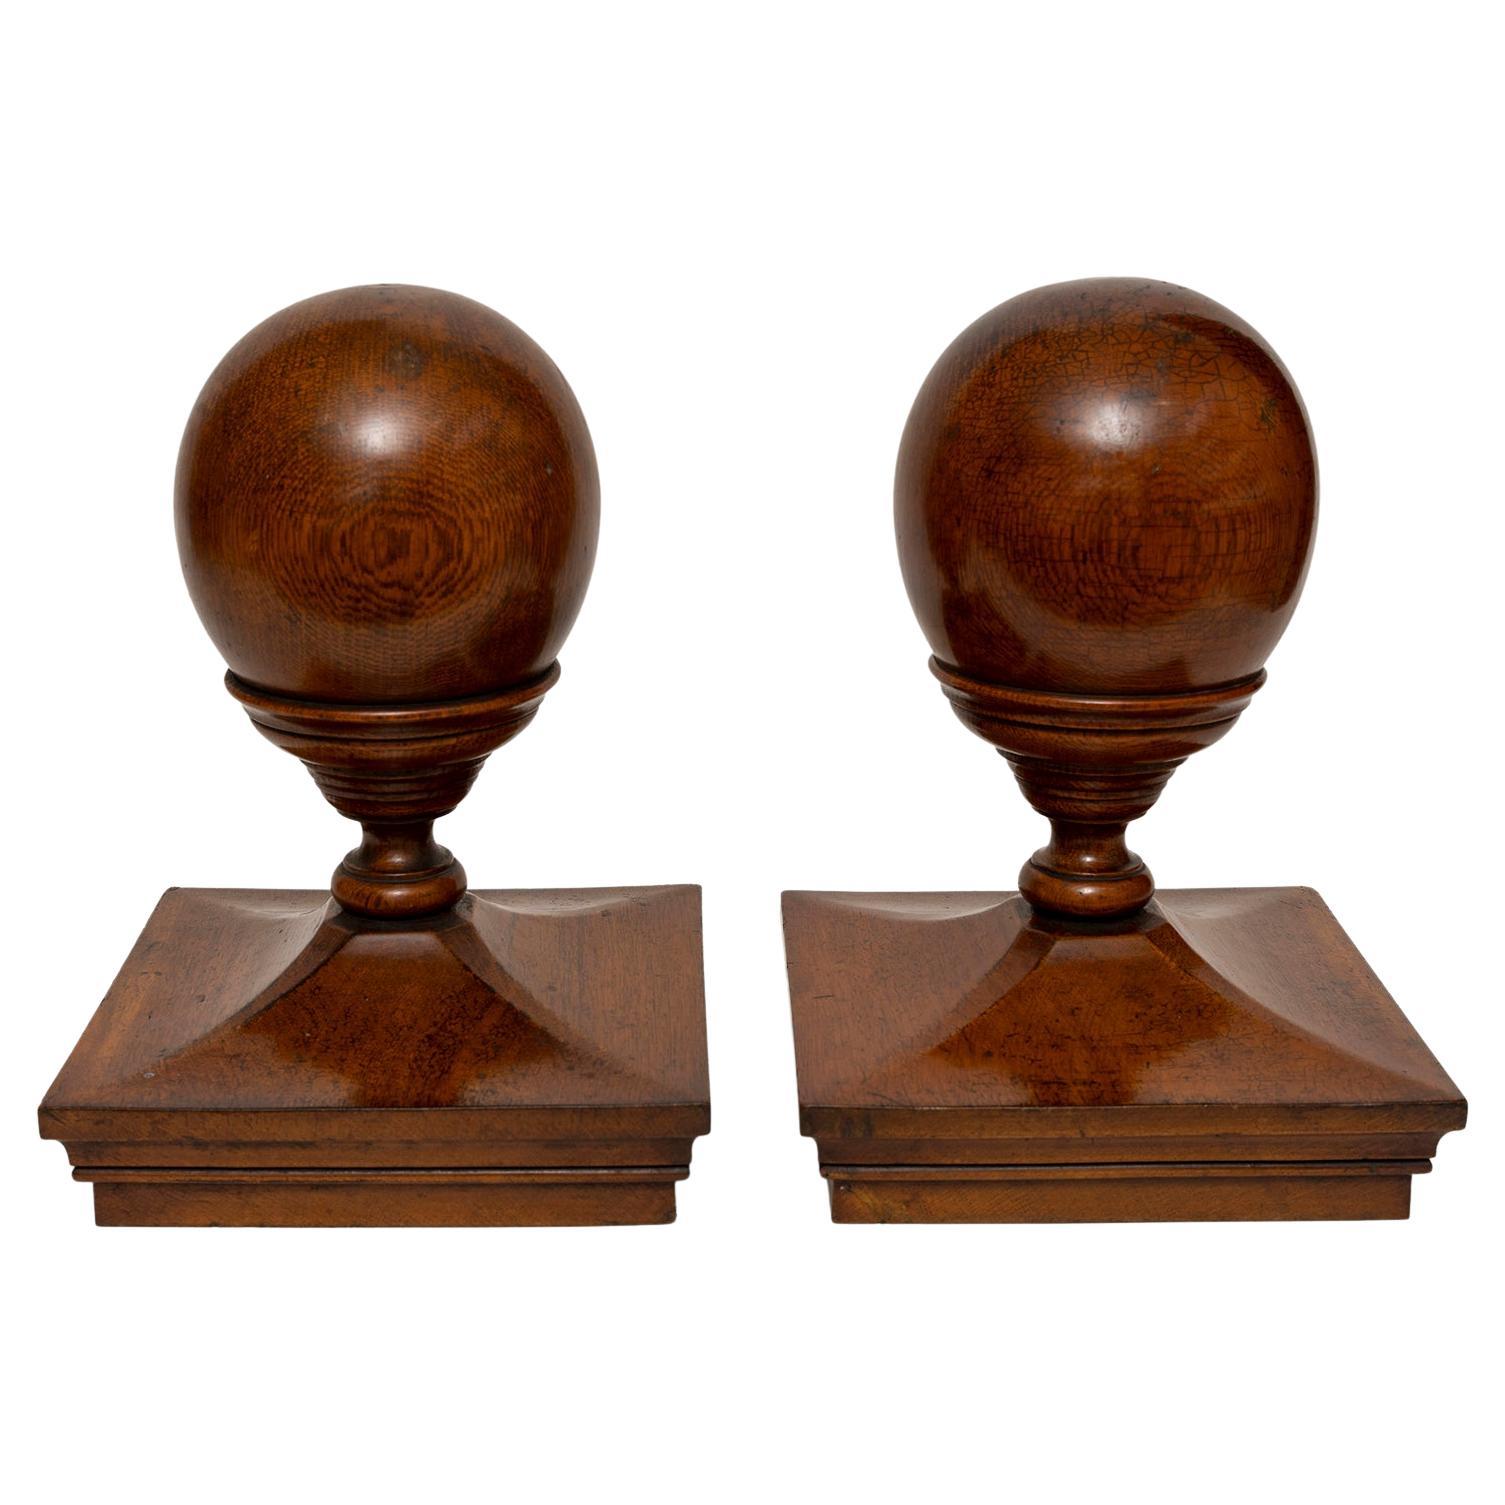 Capping Finial Newel Post Staircase Pair Oak Cup & Cover Ball 33cm 13"" high